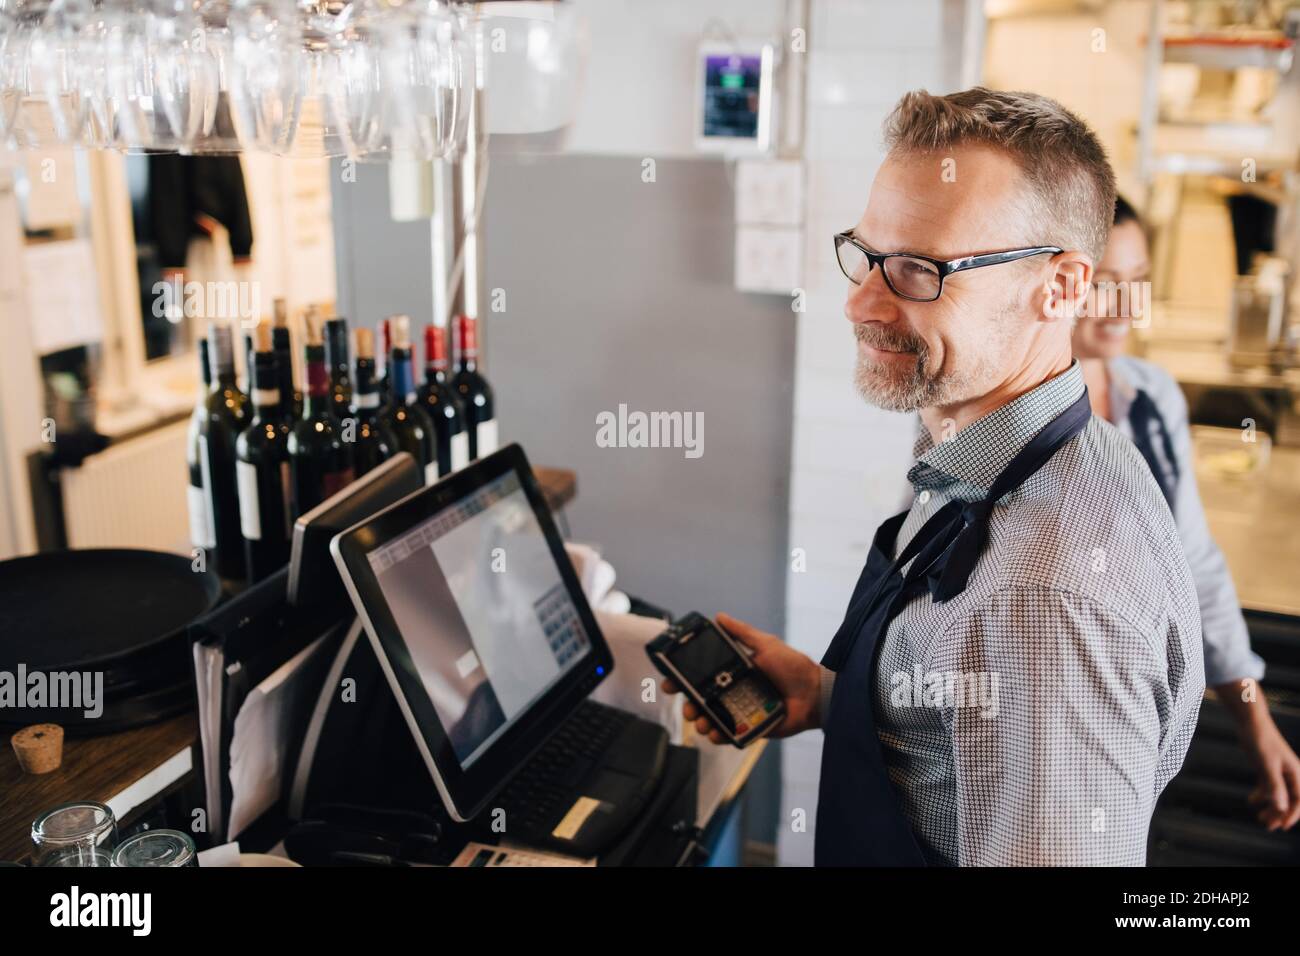 Smiling man using computer while holding credit card reader in restaurant Stock Photo